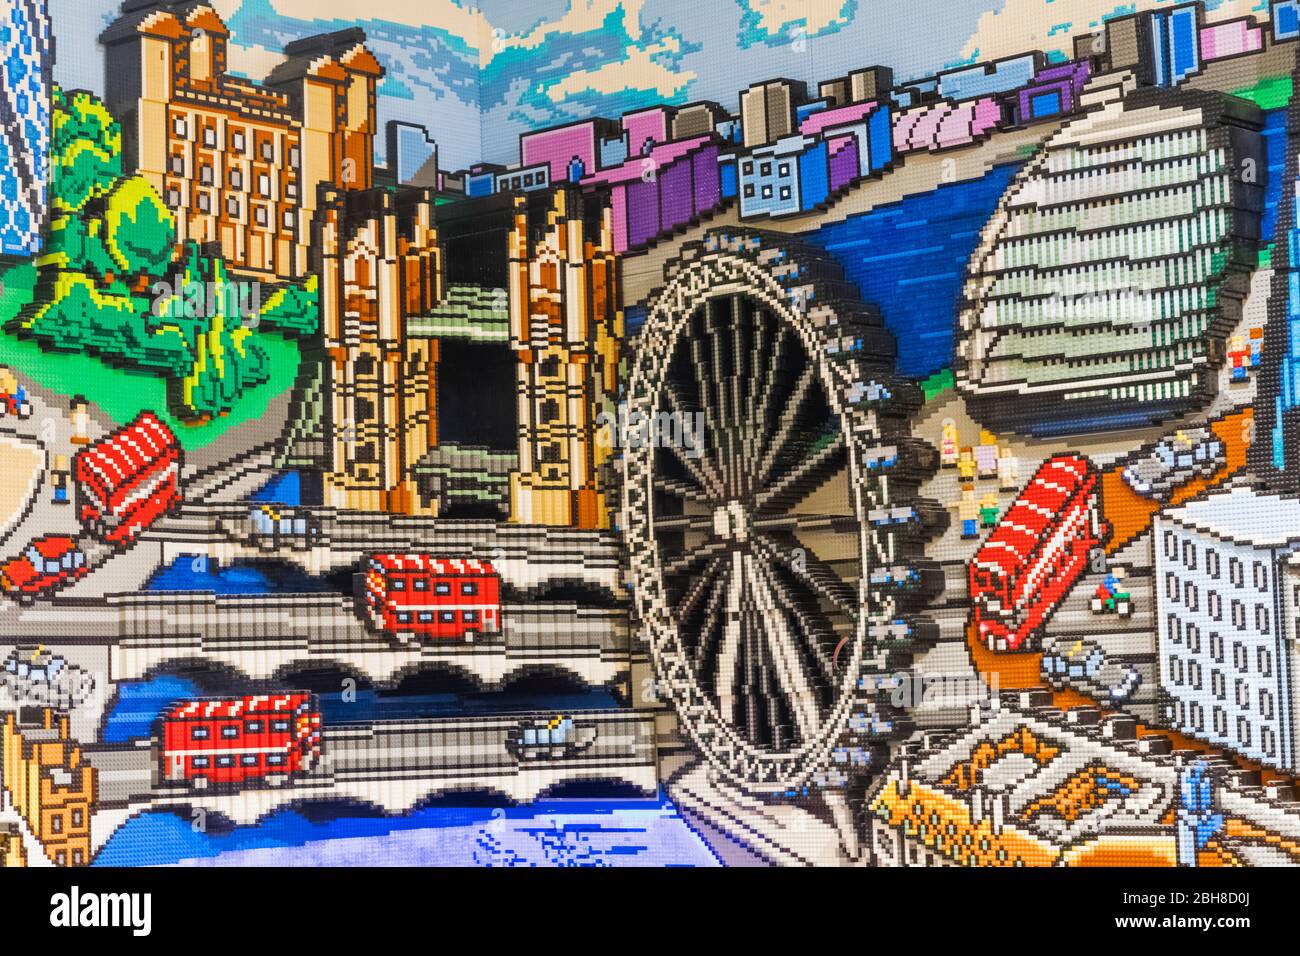 England, London, Leicester Square, Lego Store, Lego Mural of London Scenes Stock Photo